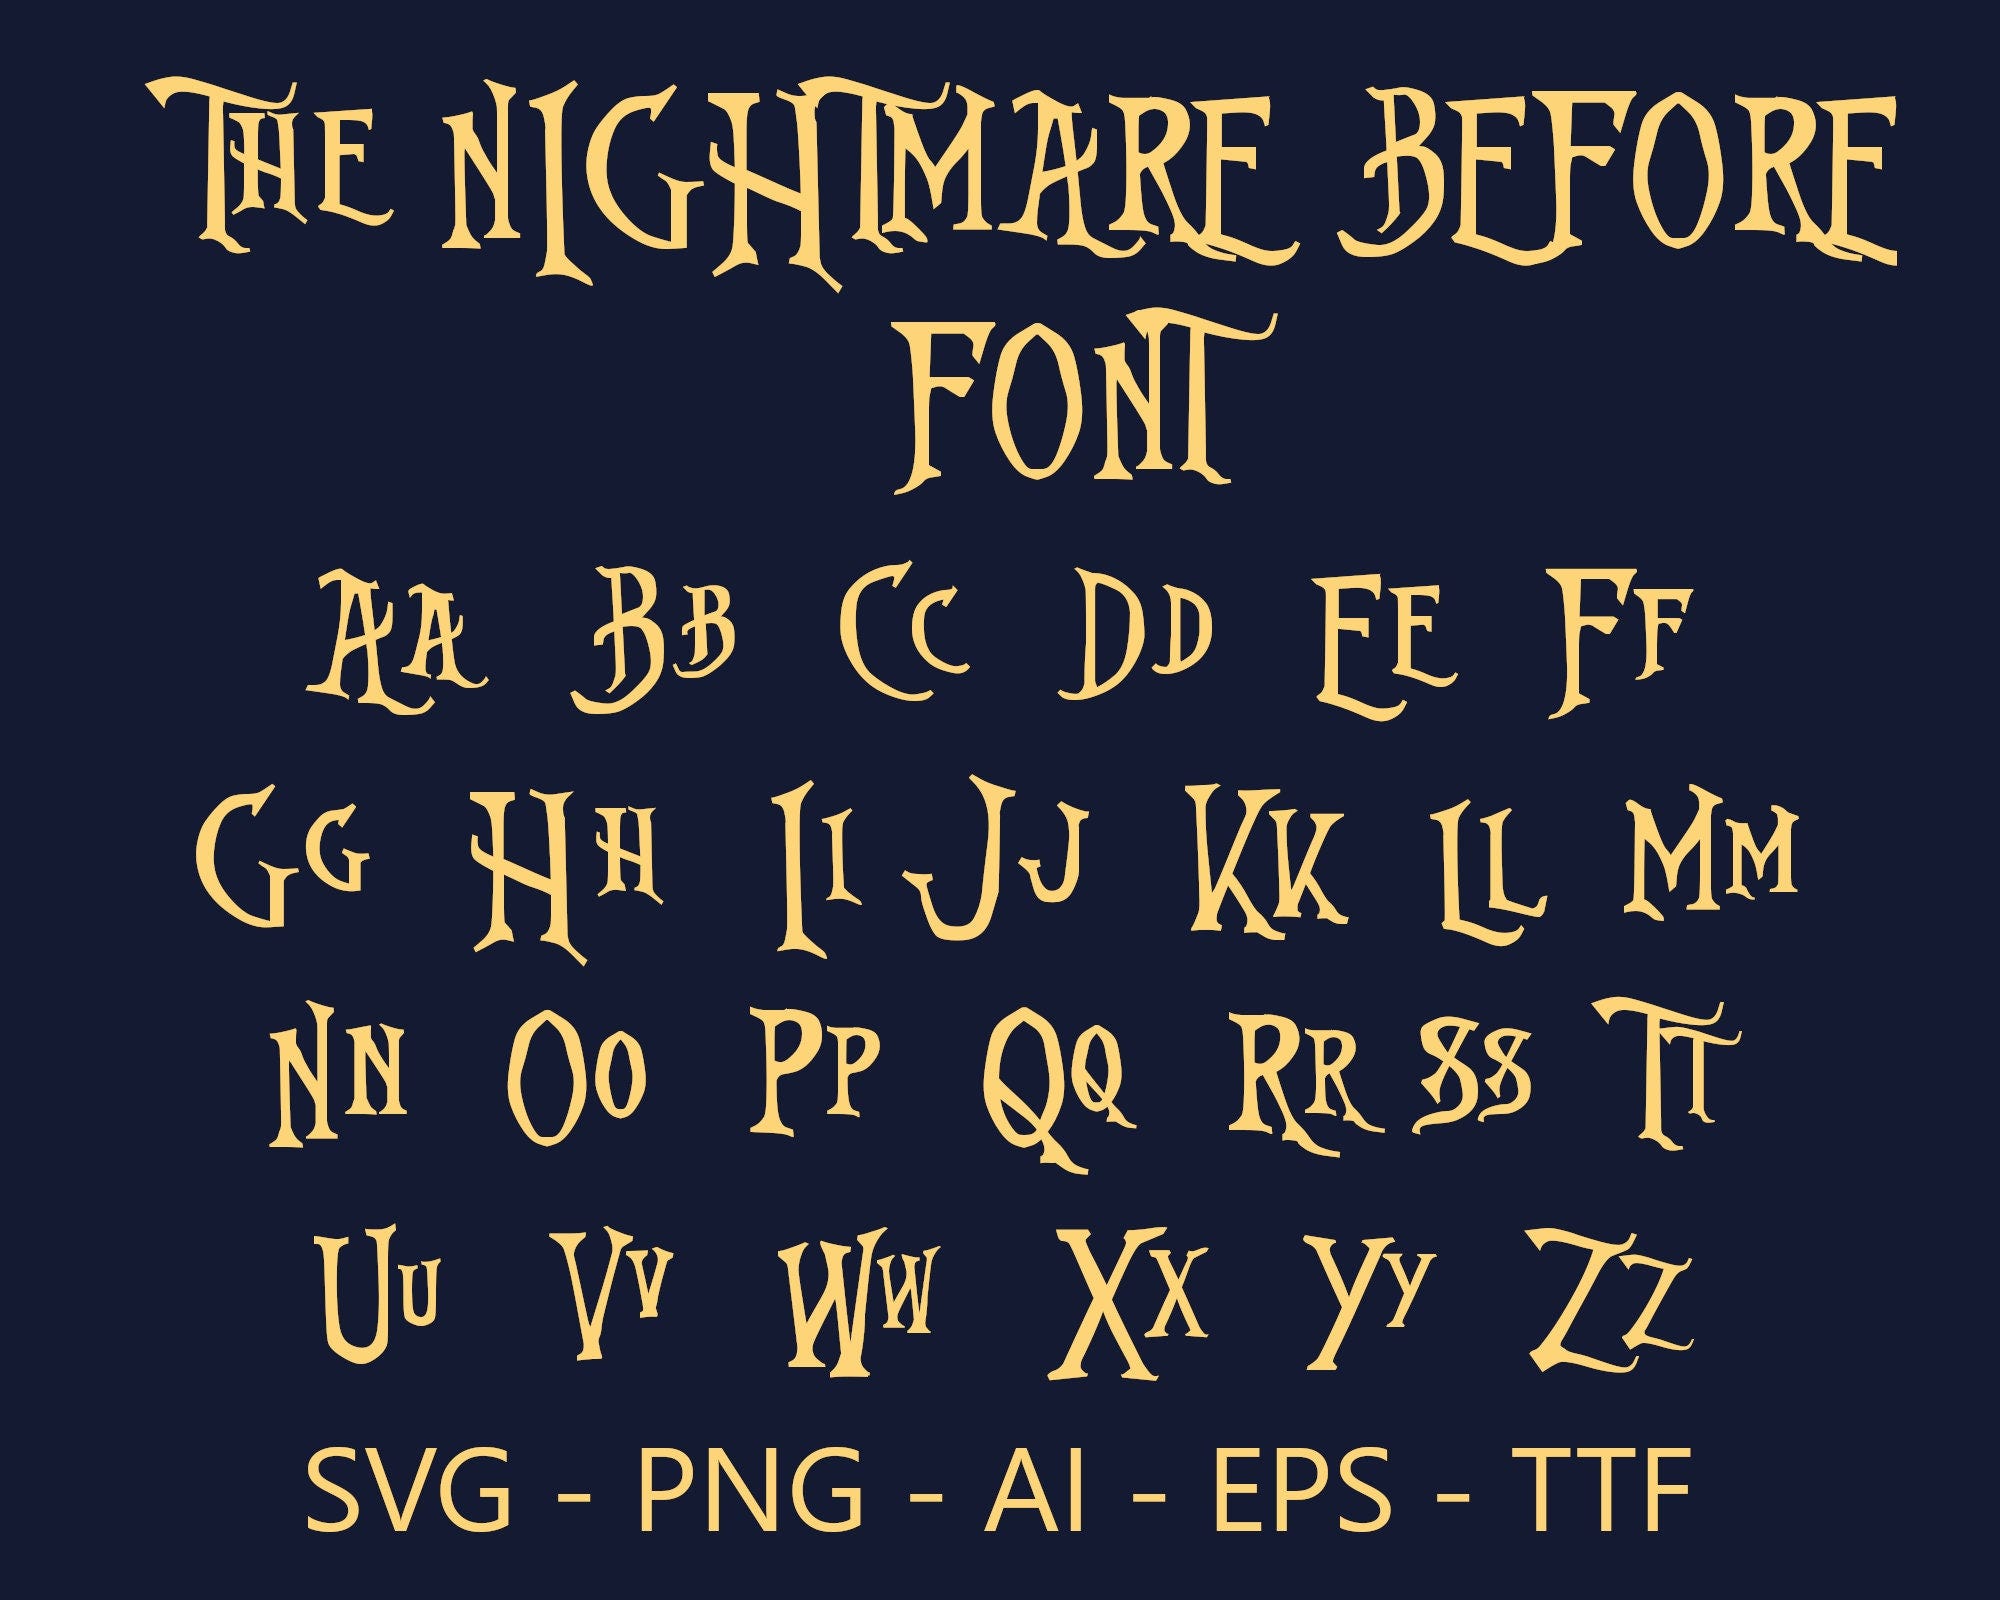 The Nightmare Before Font | ttf | svg | eps | png | cricut | silhouette | word | crafting